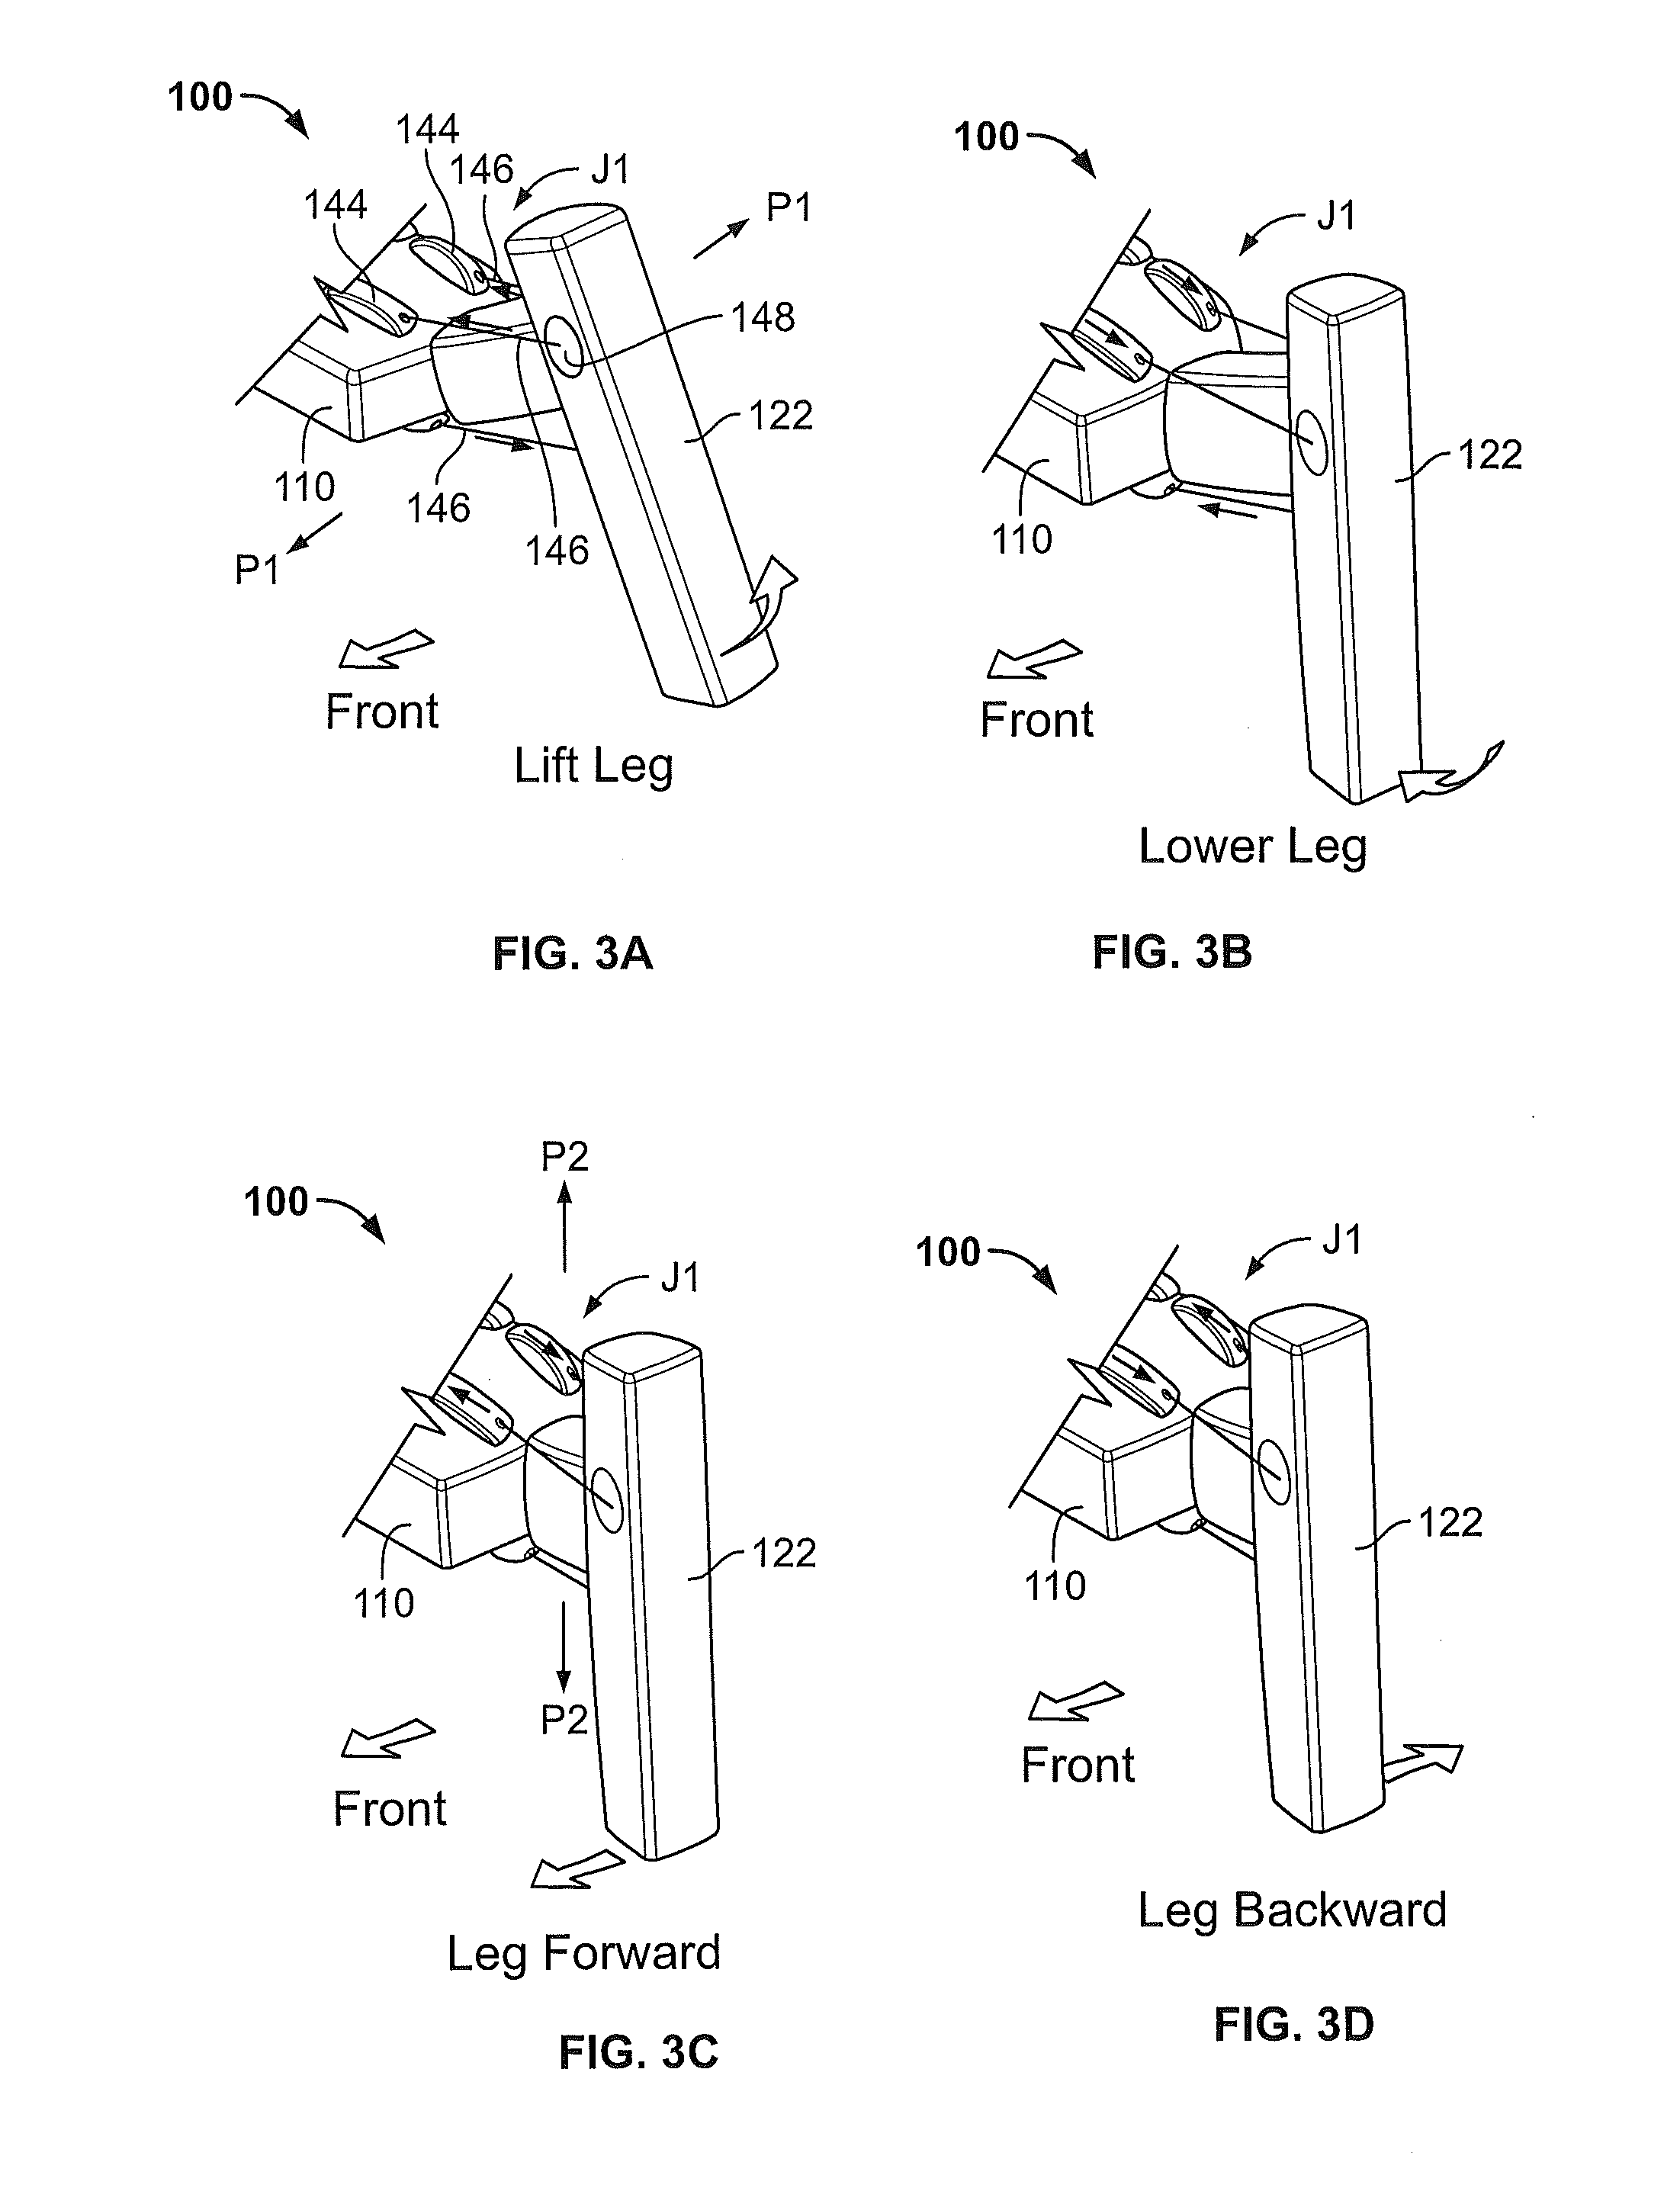 Inflatable Robots, Robotic Components and Assemblies and Methods Including Same